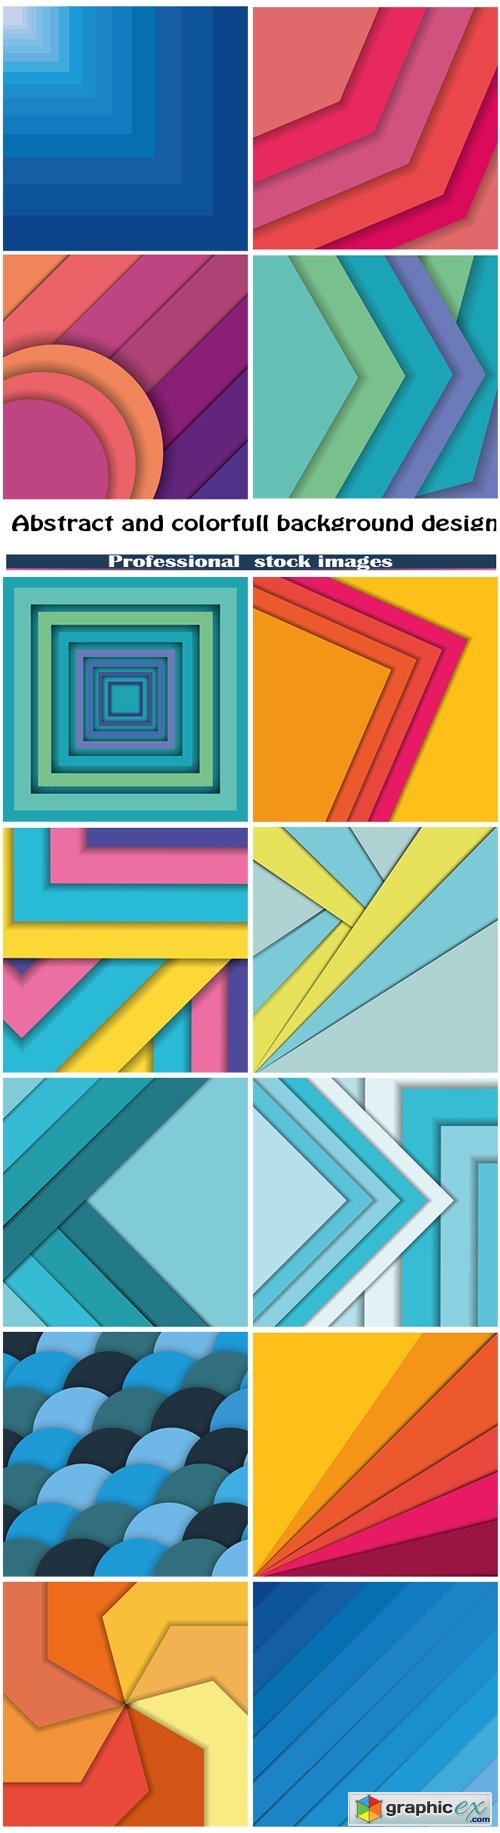 Abstract and colorfull background design